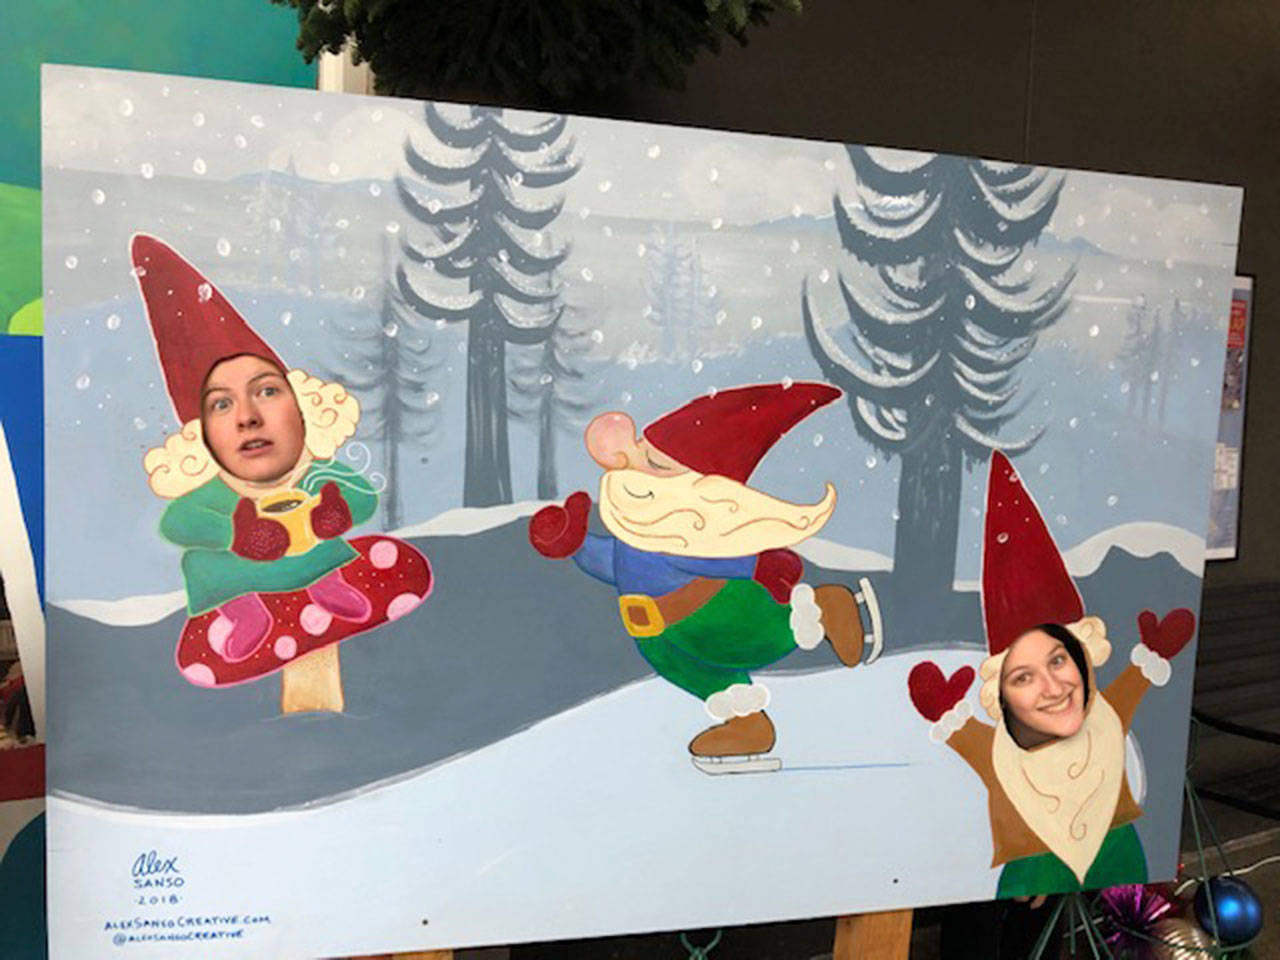 Gnome-theme boards have been put up around Winslow to create a fun-filled photo opp for downtown visitors during the holiday season. (Photo courtesy of Lari Seltzer)